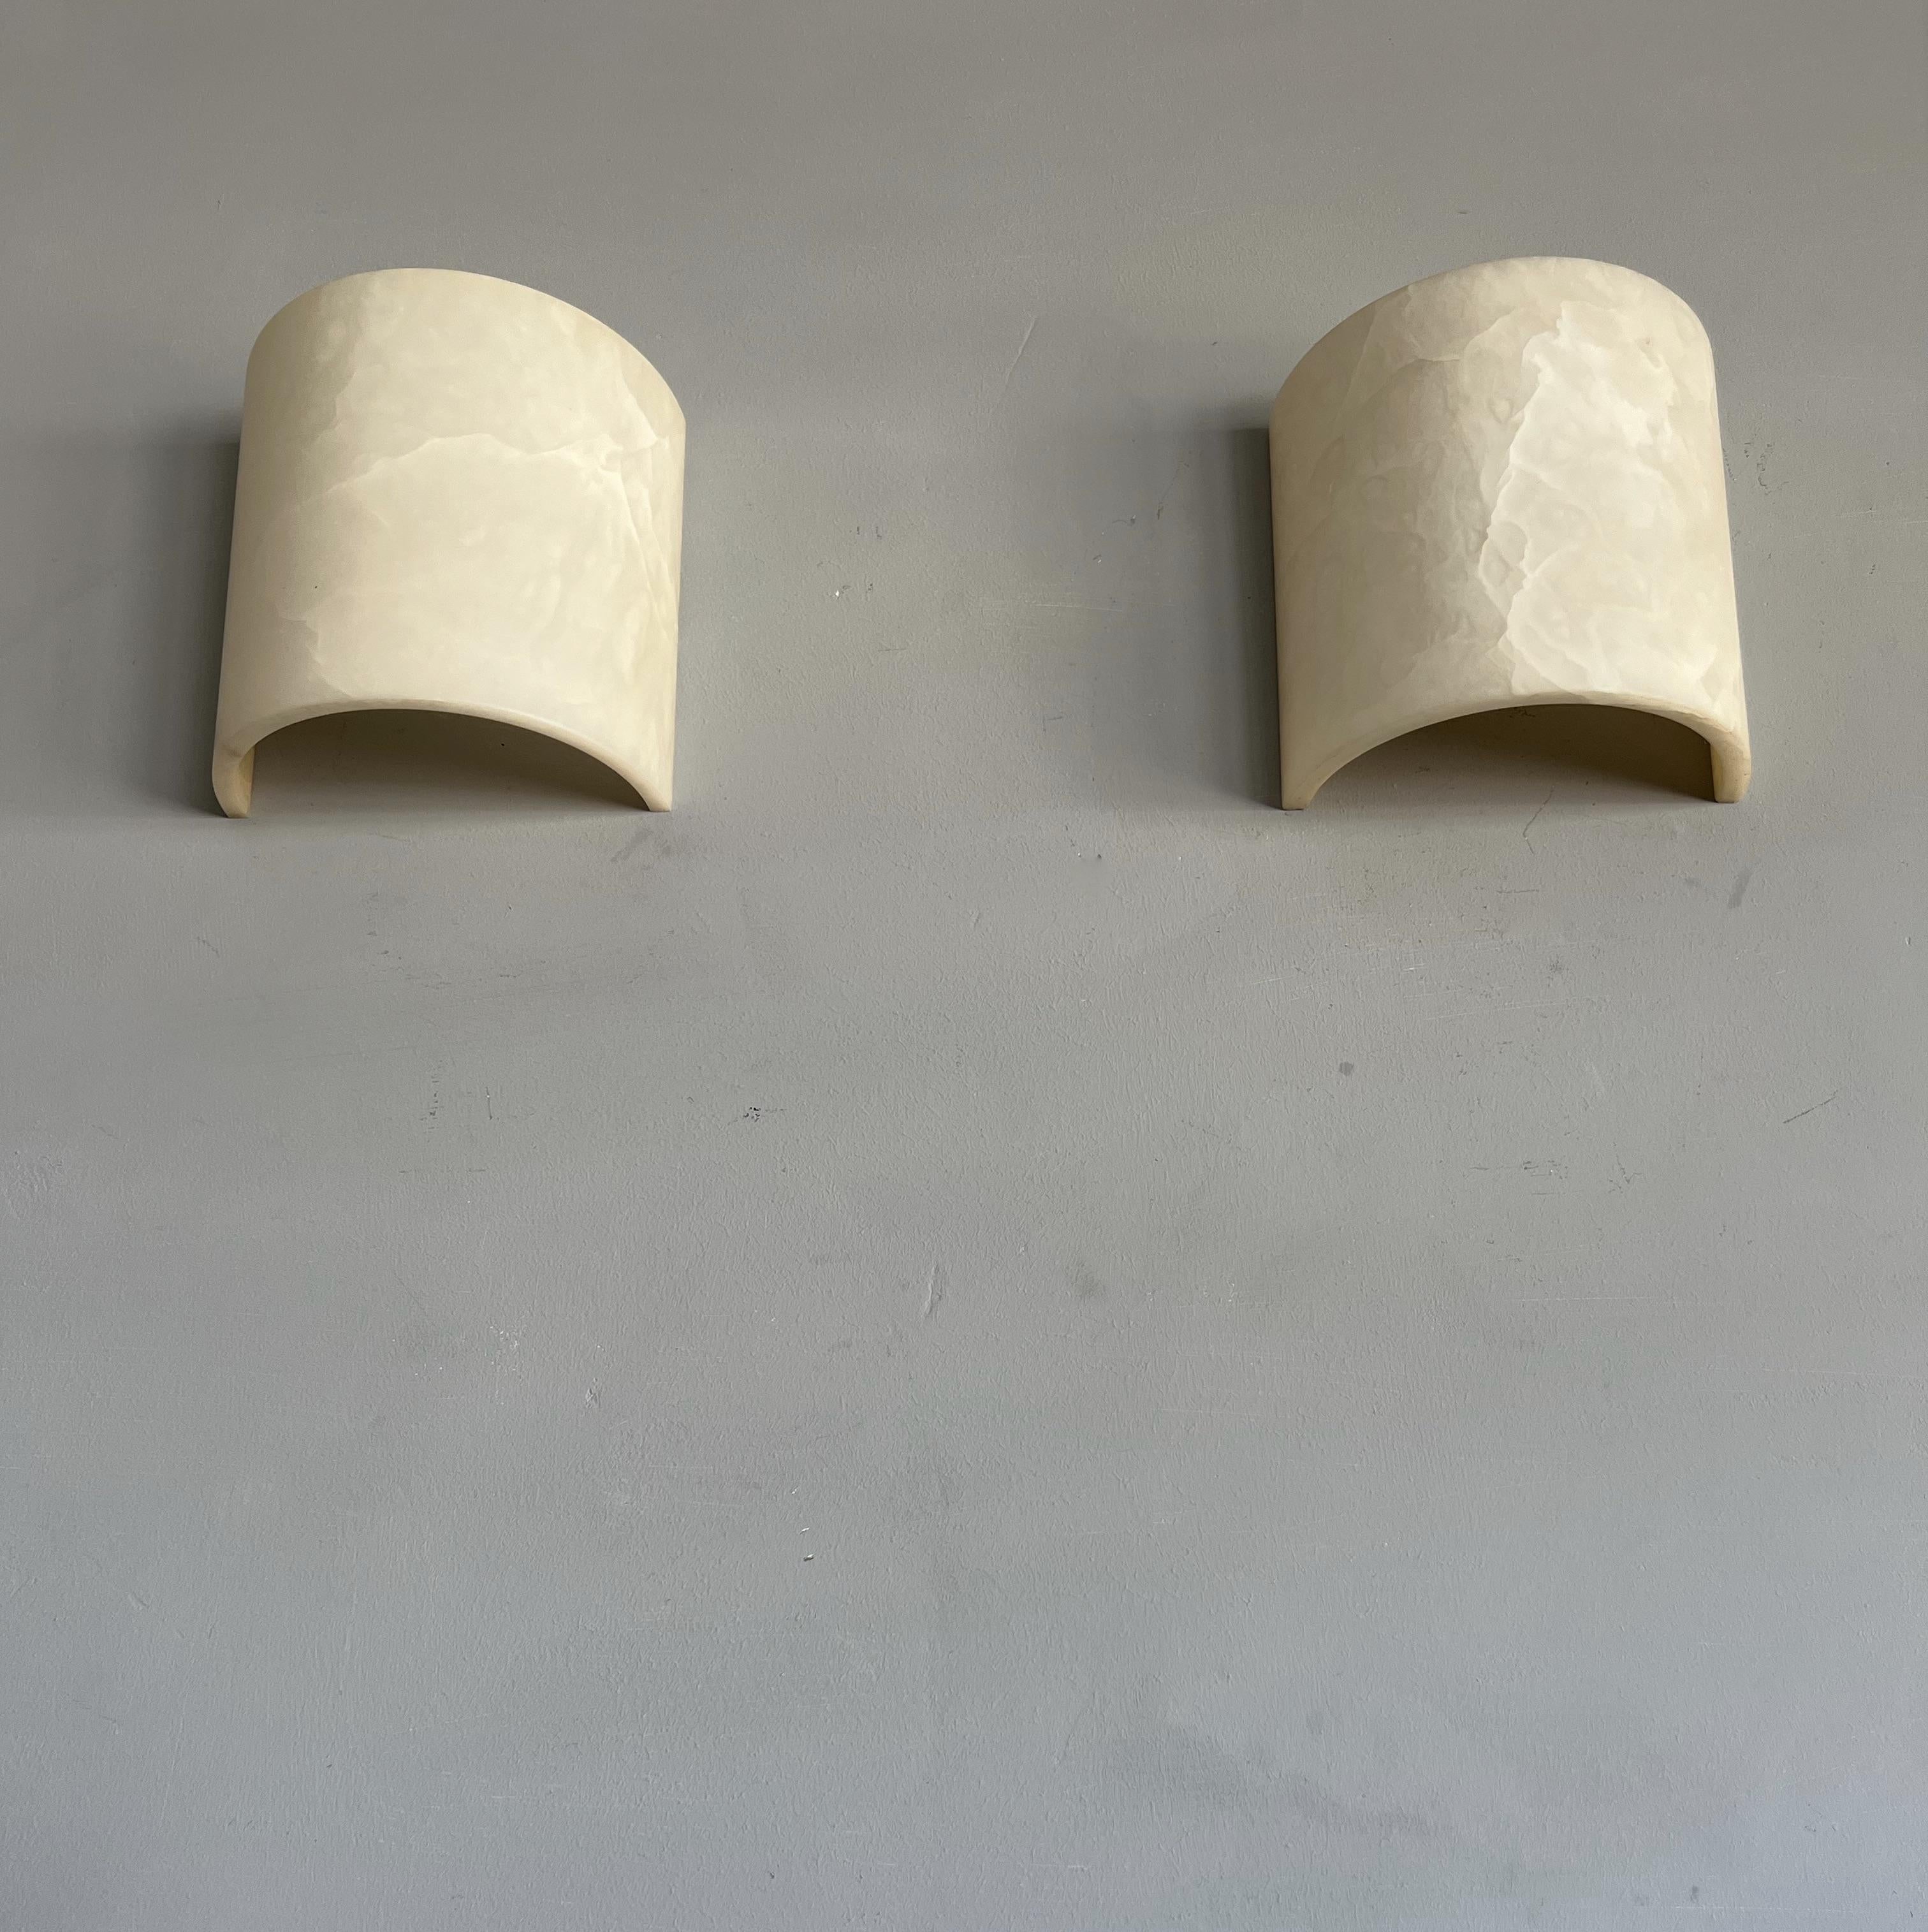 Hand-Carved Great Pair of Art Deco Style Alabaster Up & Down Light Wall Sconces / Fixtures